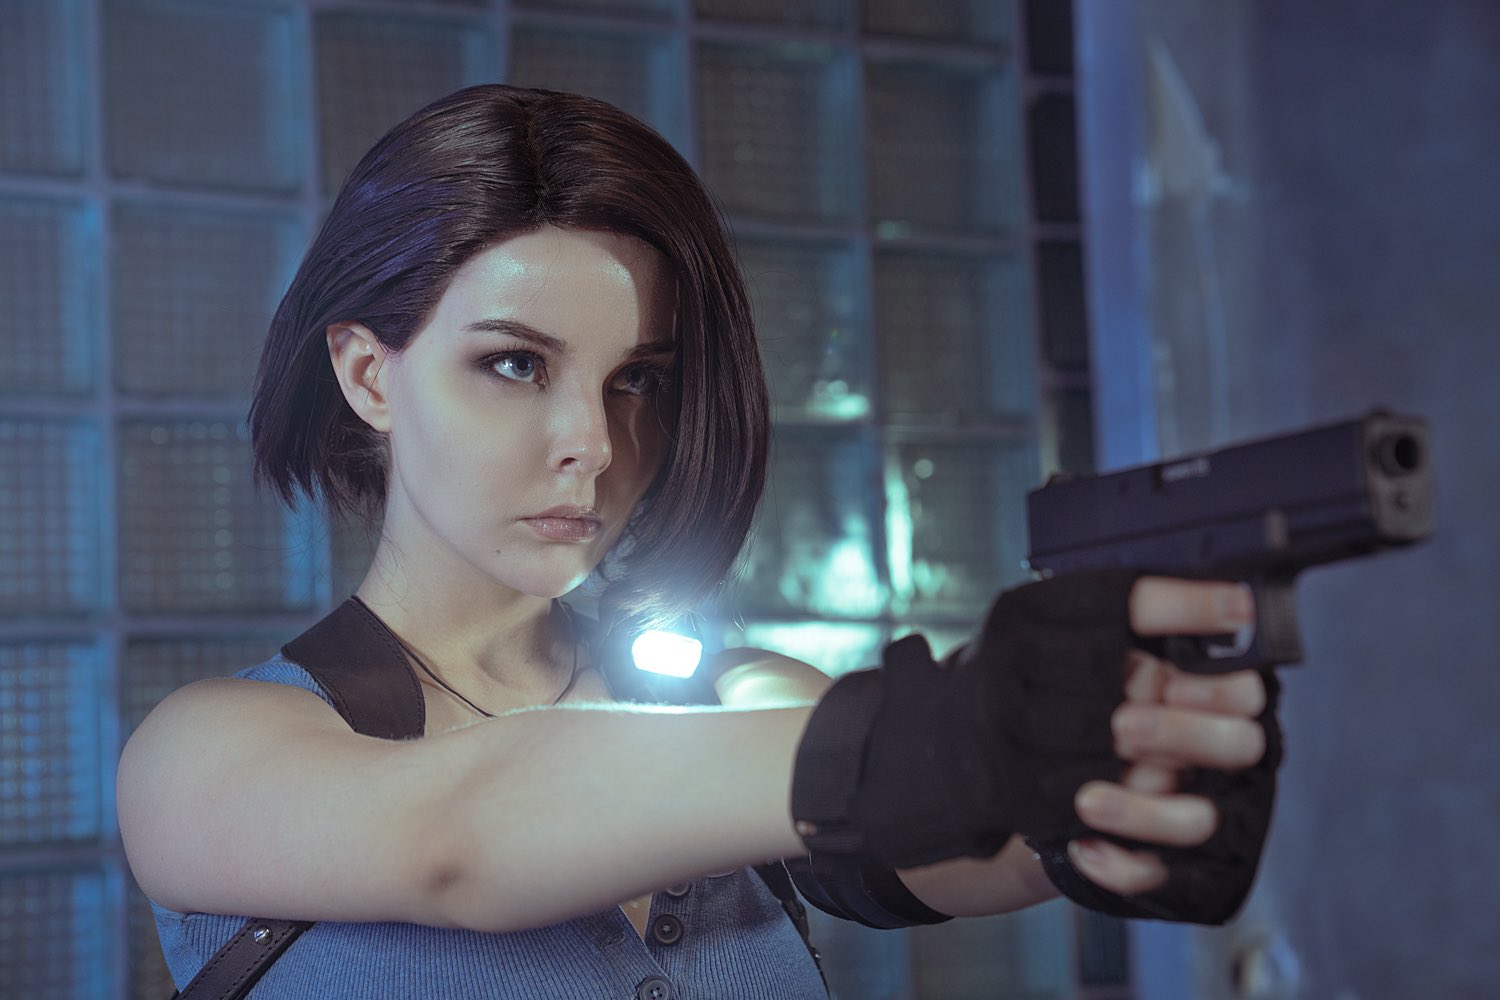 Model Cosplay Women Indoors Looking At The Side Jill Valentine Resident Evil 3 Gun Aiming Shoulder L 1500x1000